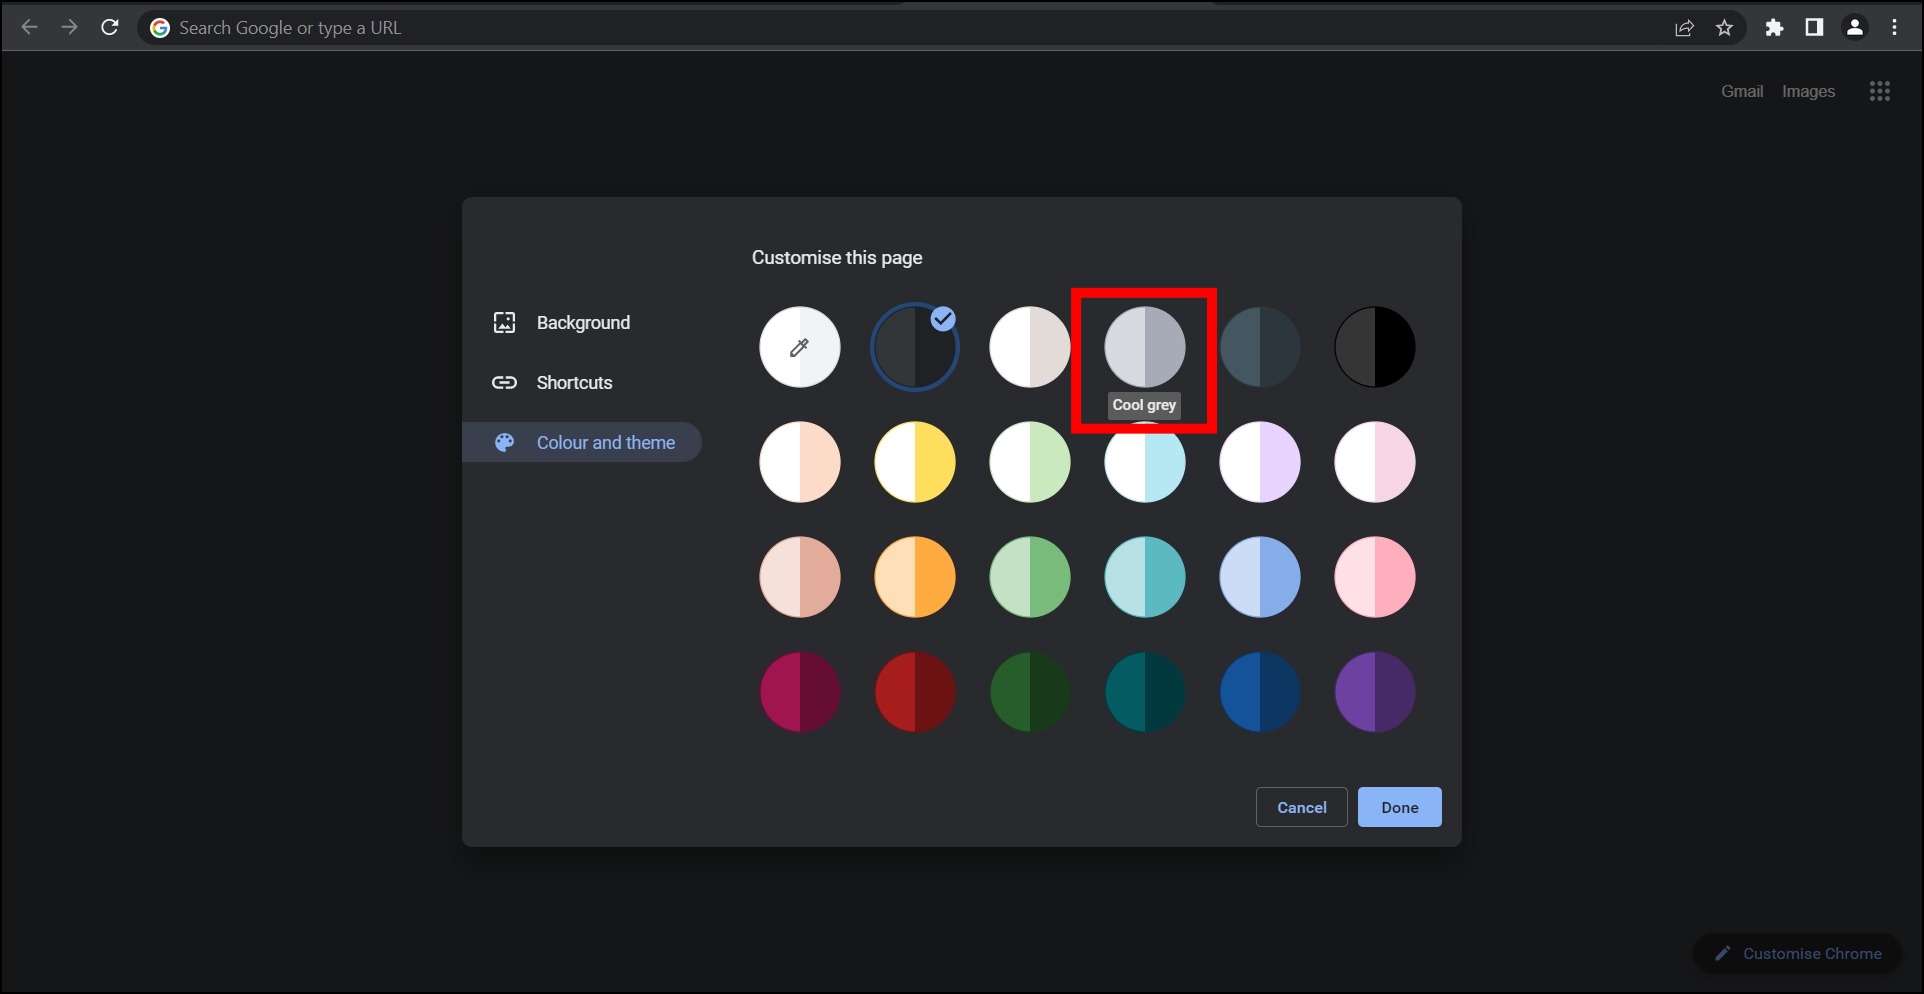 Change the Color of the browser